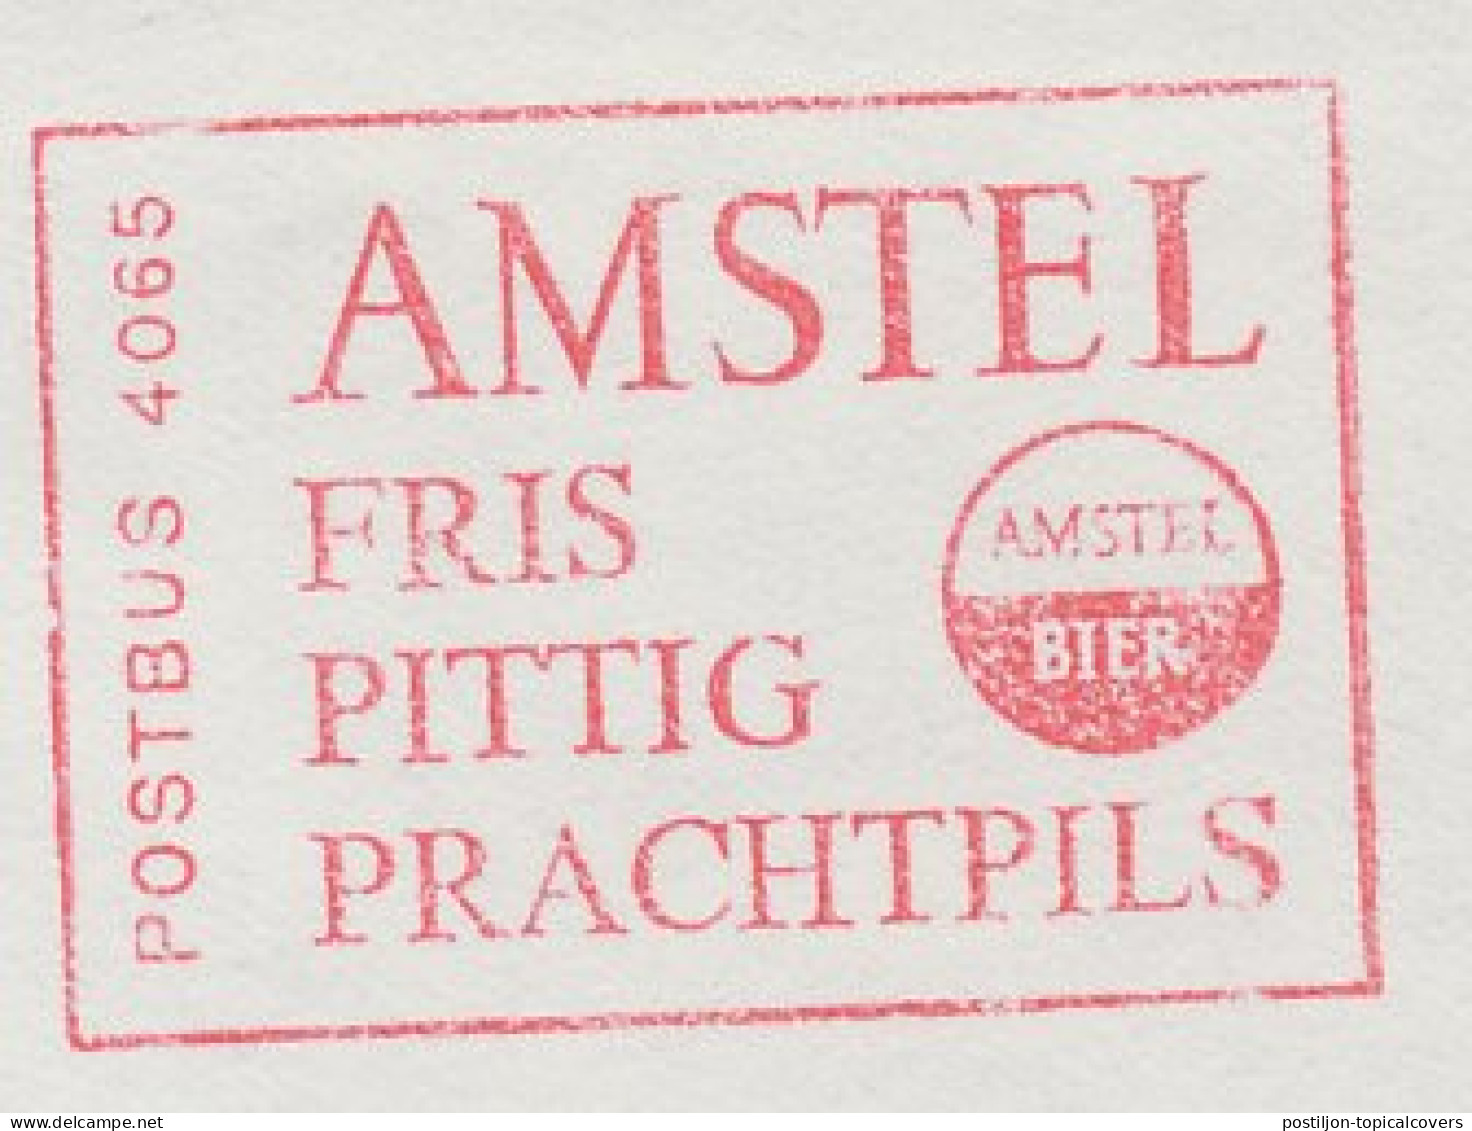 Meter Cover Netherlands 1965 Beer - Pils - Amstel - Brewery - Wines & Alcohols